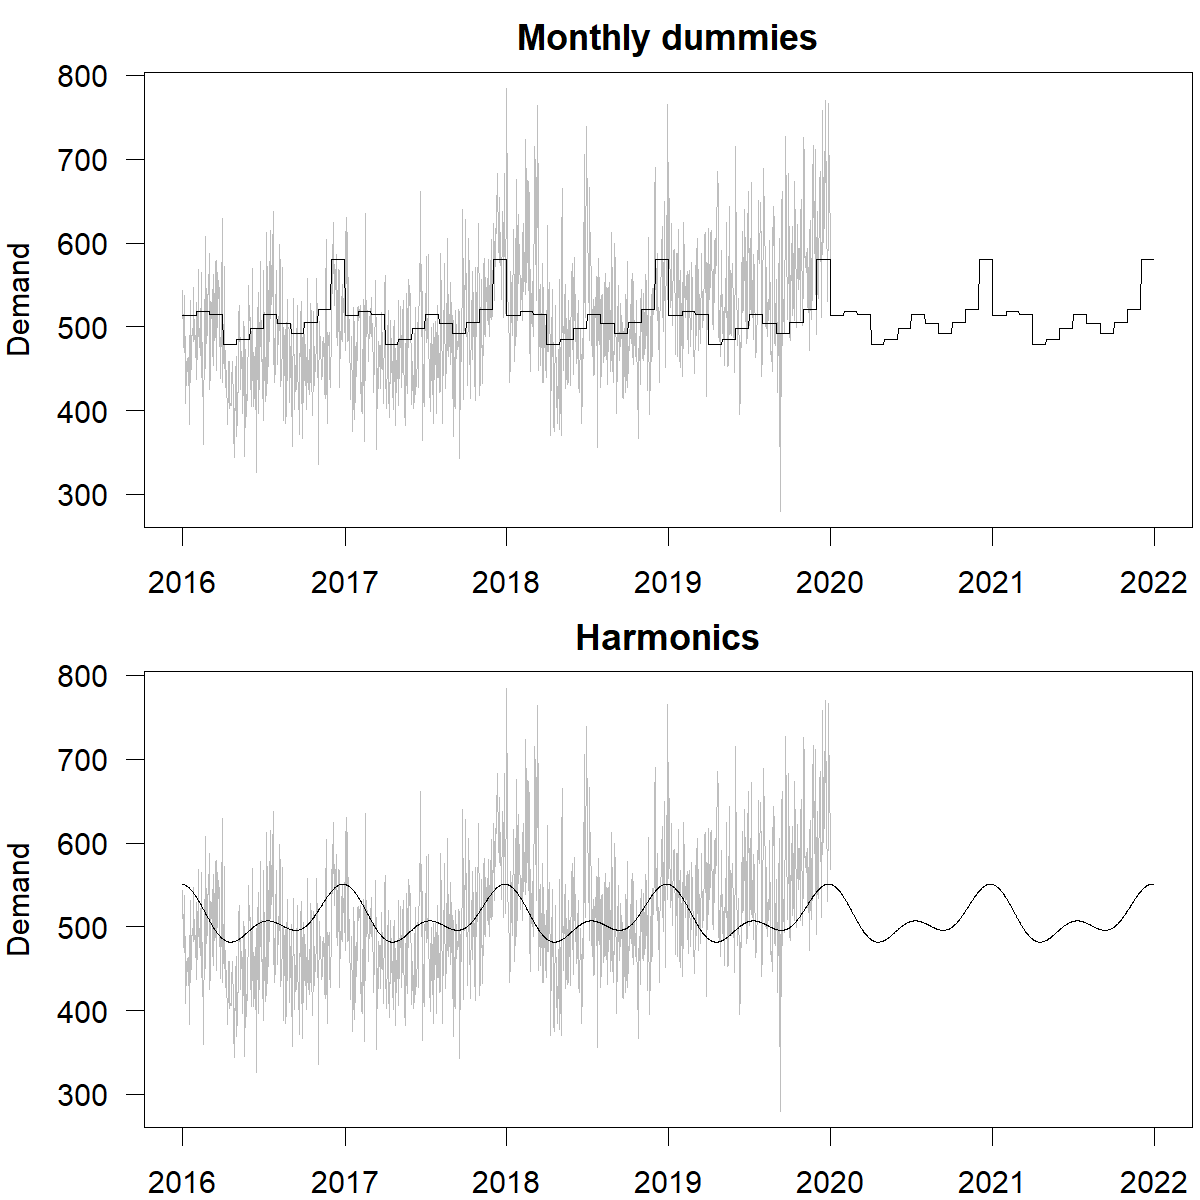 Two time series of daily ambulance demand from 2016 to 2019, and forecasts for 2020 and 2021. The vertical axes go from 300 to 800. The top panel is labeled "Monthly dummies"; its fit and forecast show step changes. The bottom panel is labeled "Harmonics"; its fit and forecast show smooth variation.